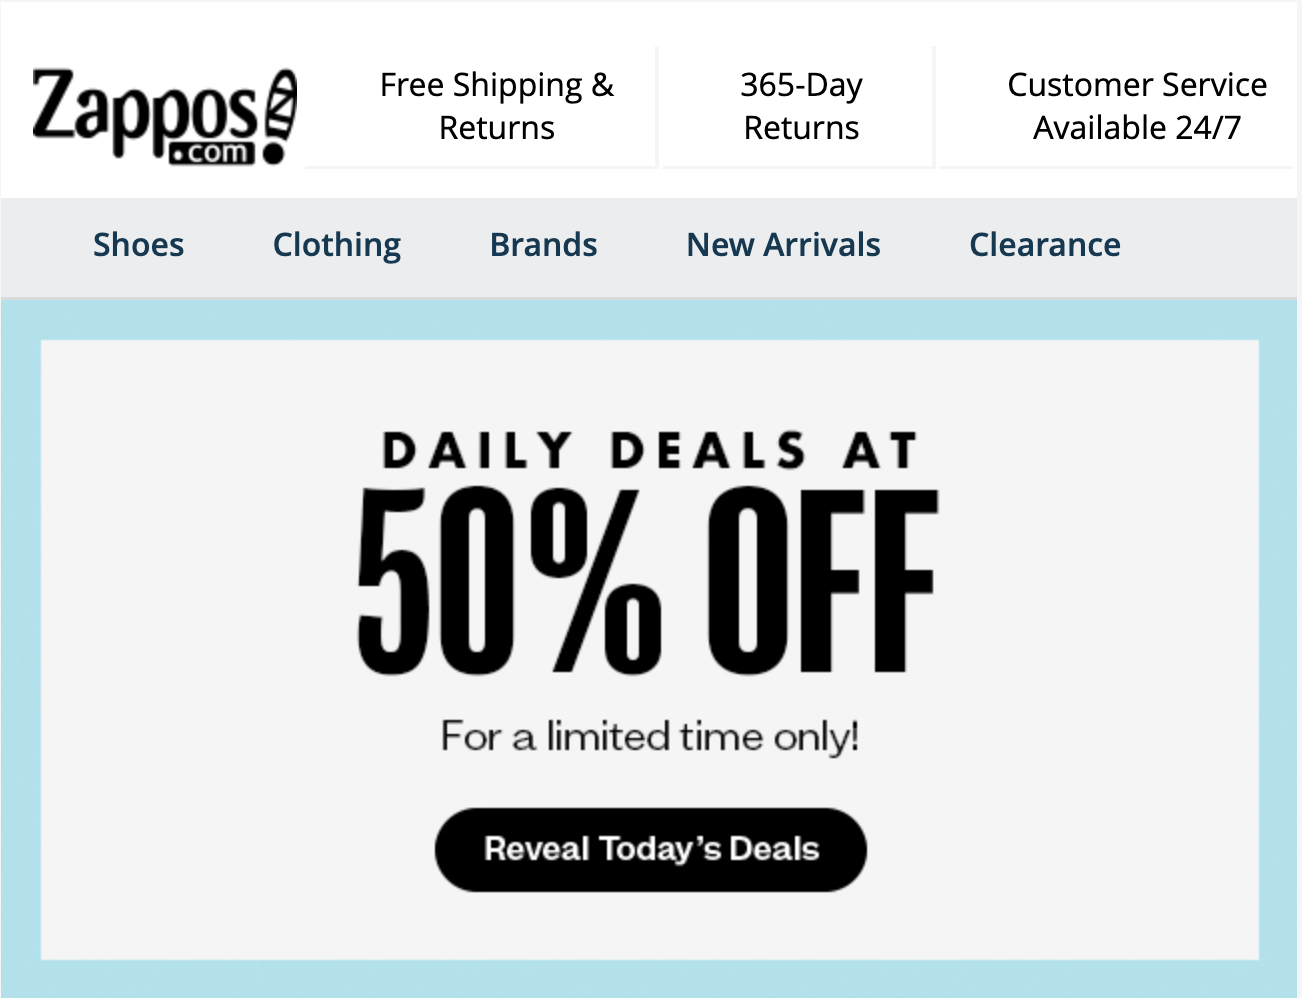 Screenshot of a Zappos email that says "Daily deals at 50% off for a limited time only" 